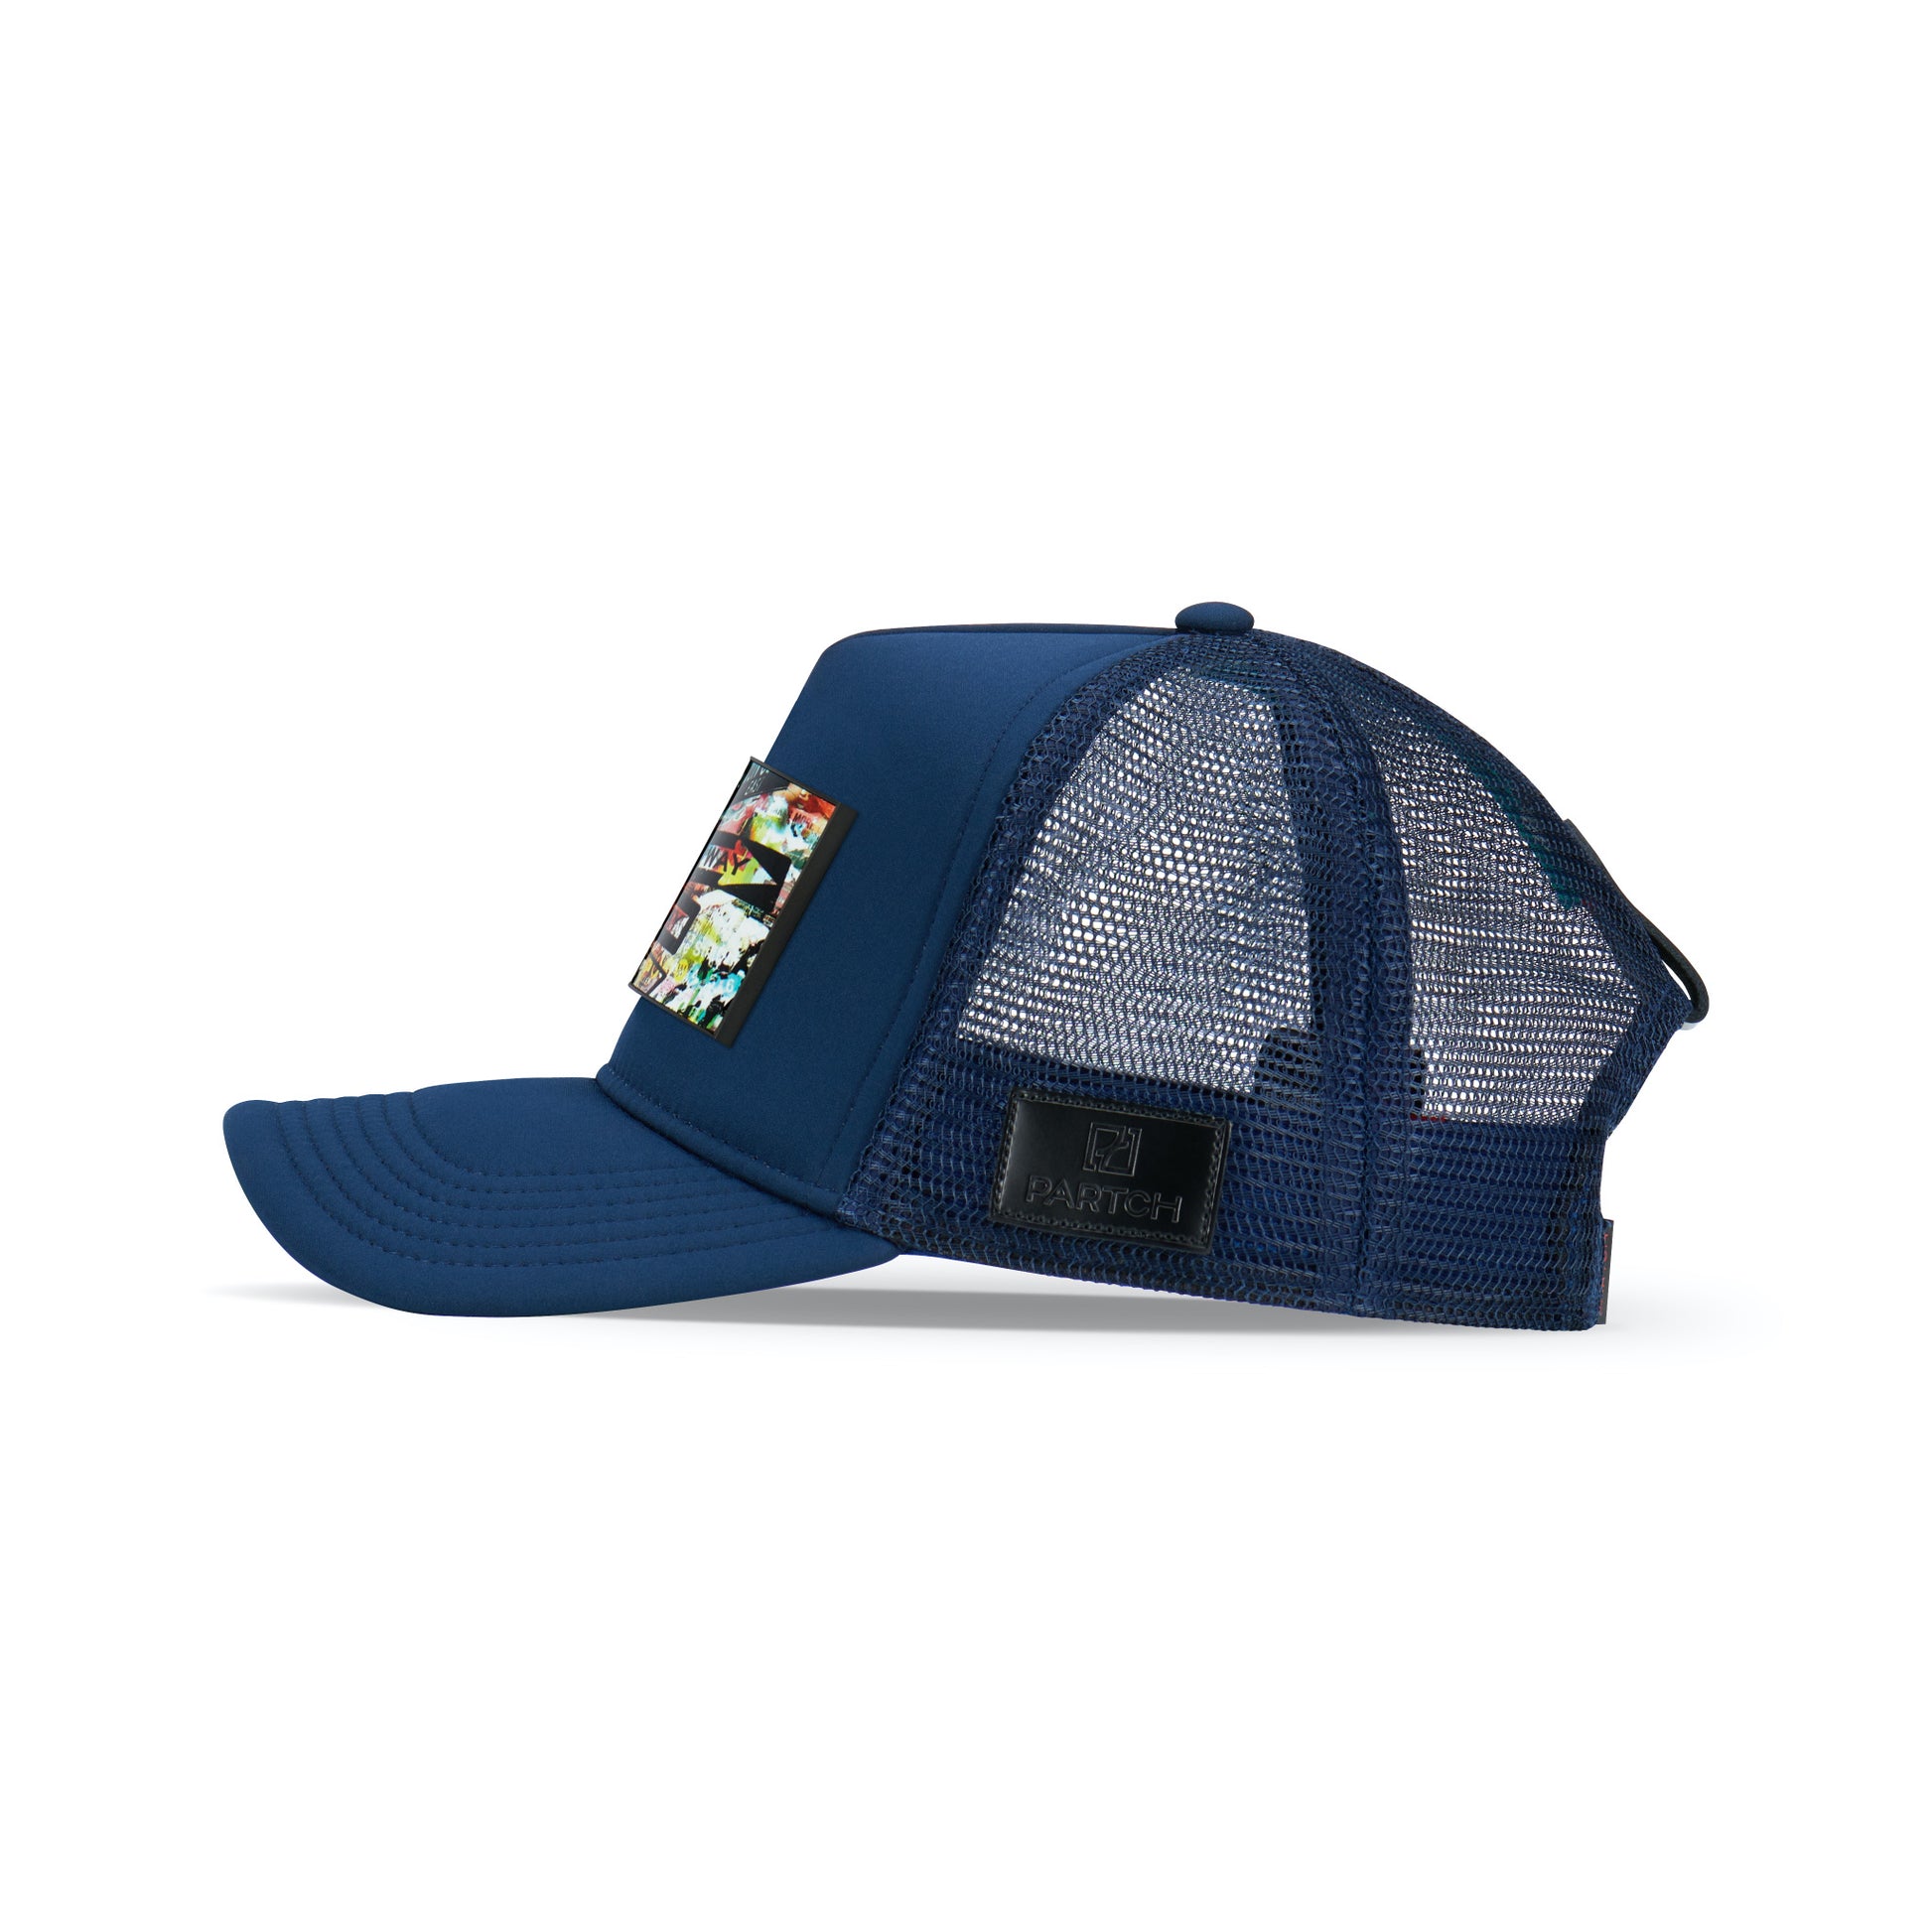 Partch Trucker hat Navy Blue with Art front Panel patch removable | Men’s and Women’s Collection